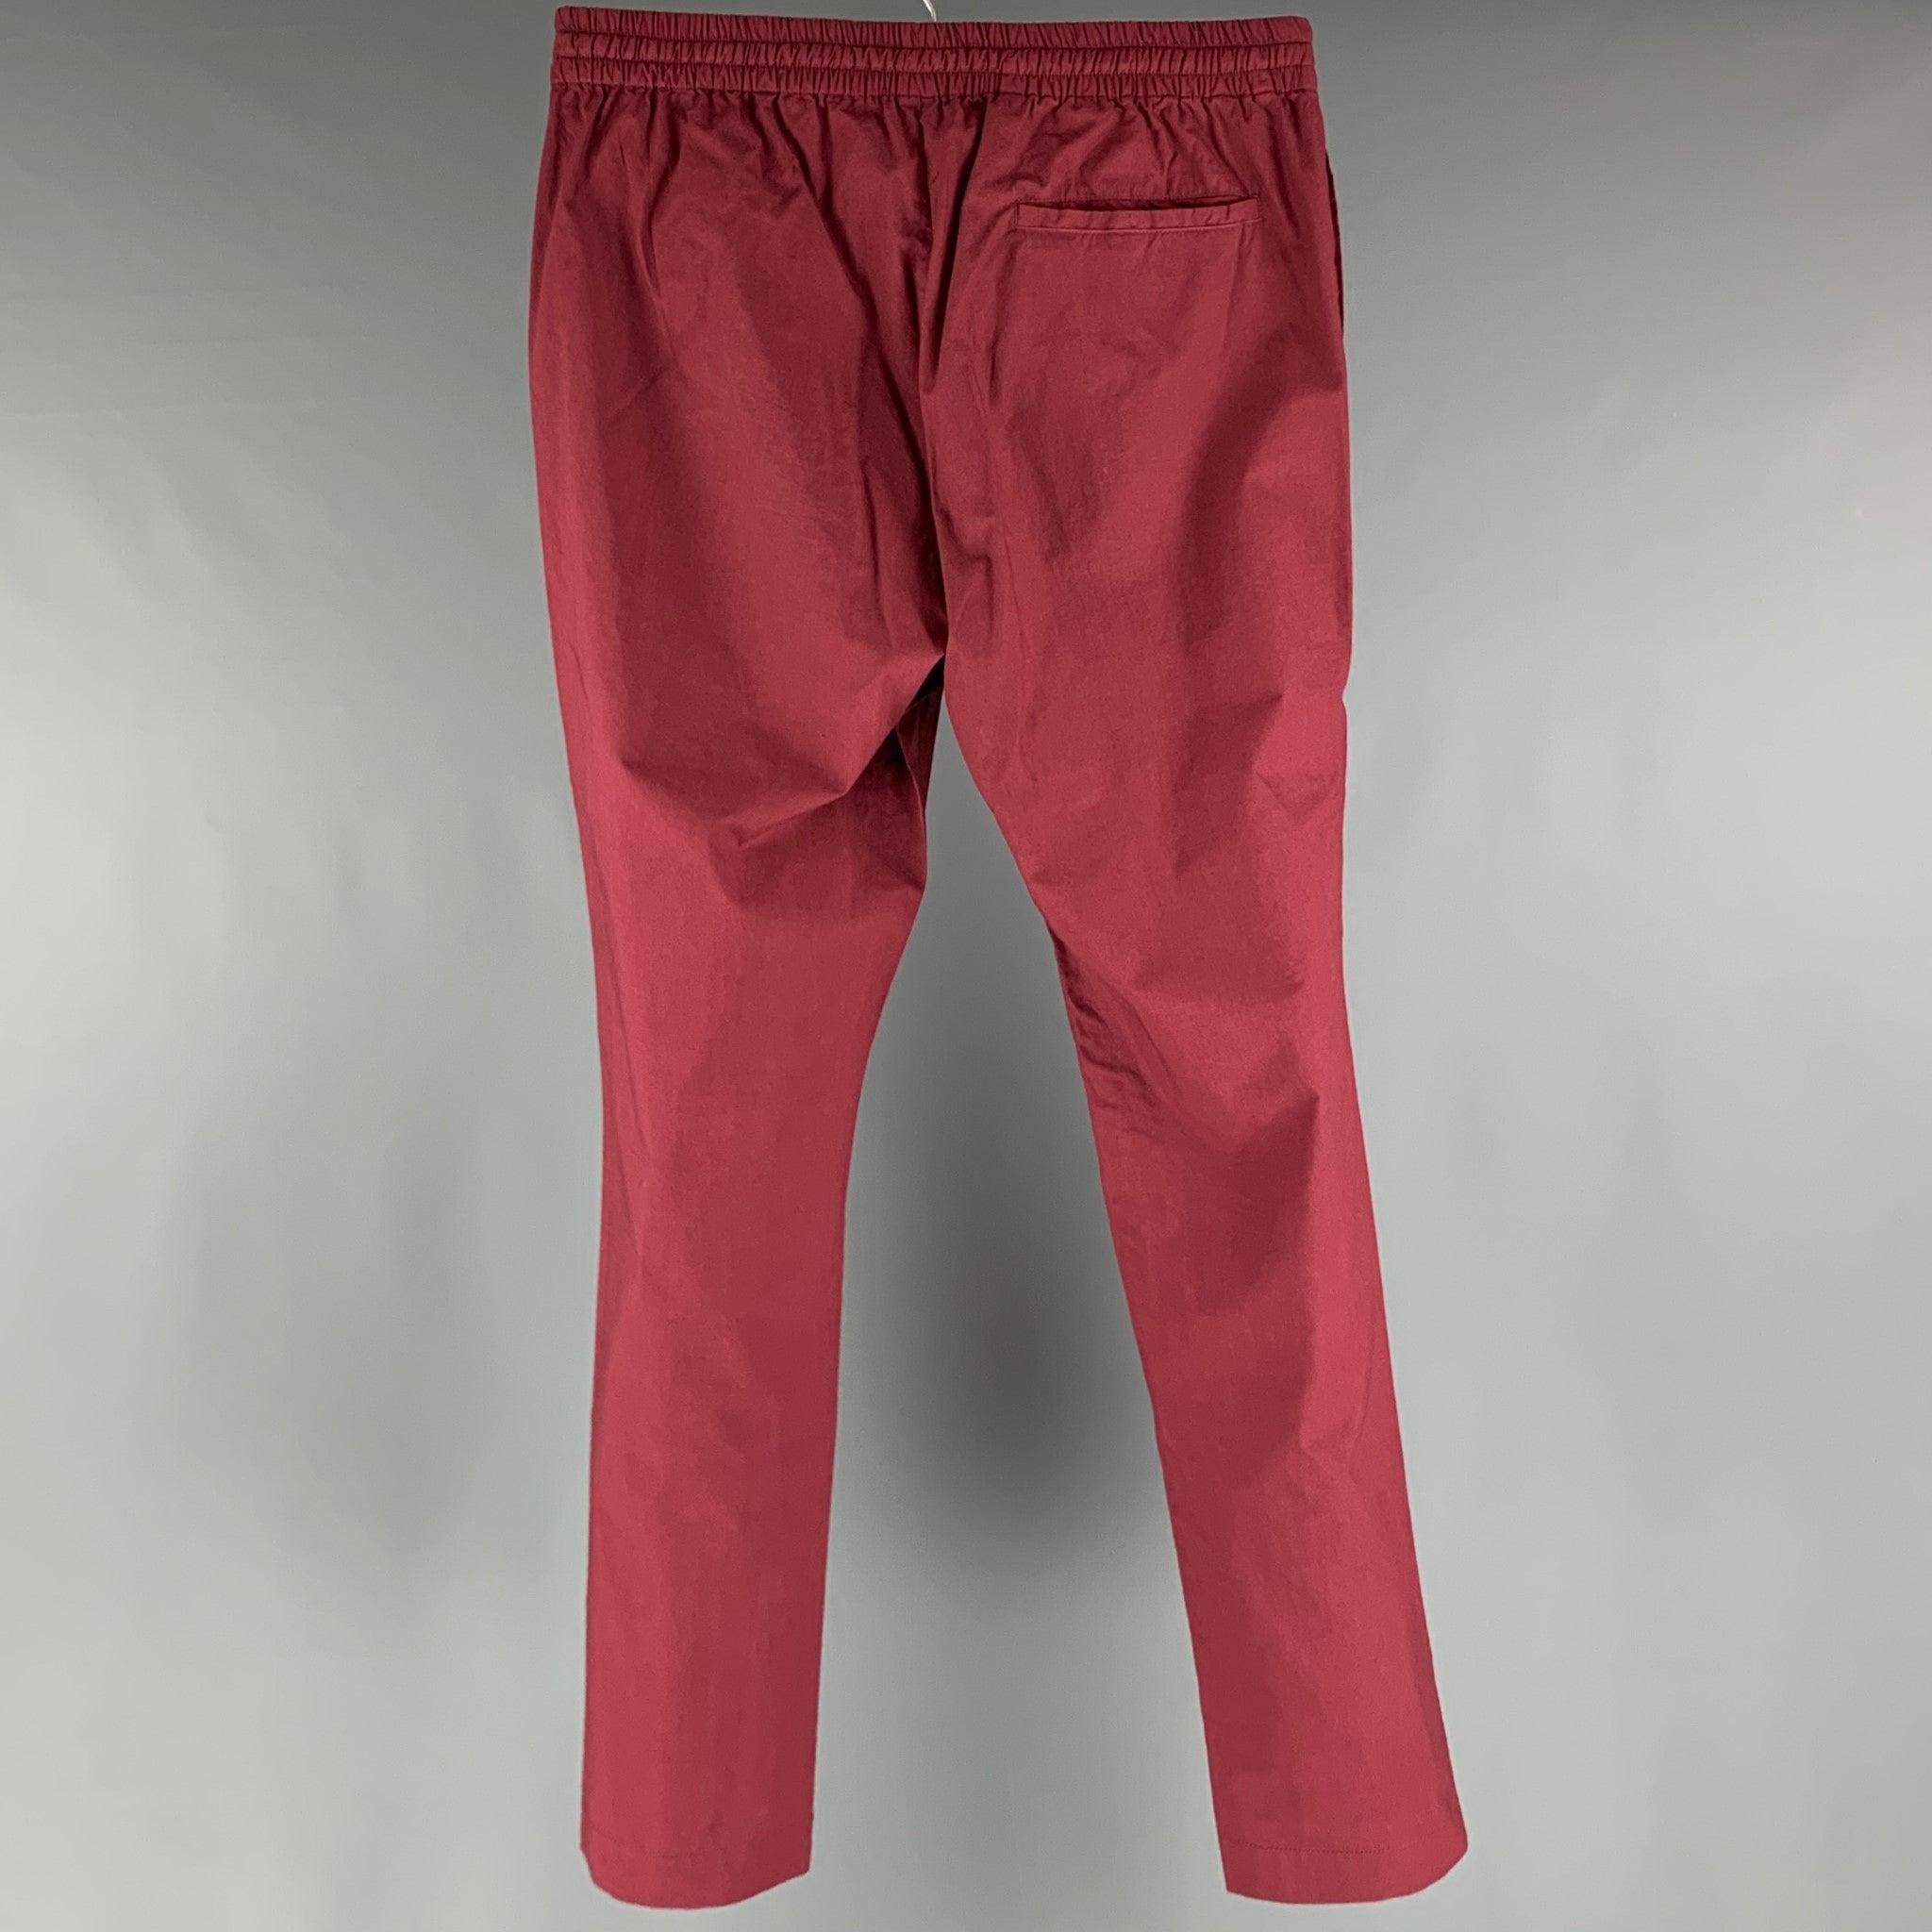 TOMAS MAIER casual pants comes in a burgundy cotton woven material featuring an elastic waistband, welt pockets, and a drawstring closure. Made in Italy.Excellent Pre- Owned Conditions. 

Marked:   M 

Measurements: 
  Waist: 28 inches Rise: 10